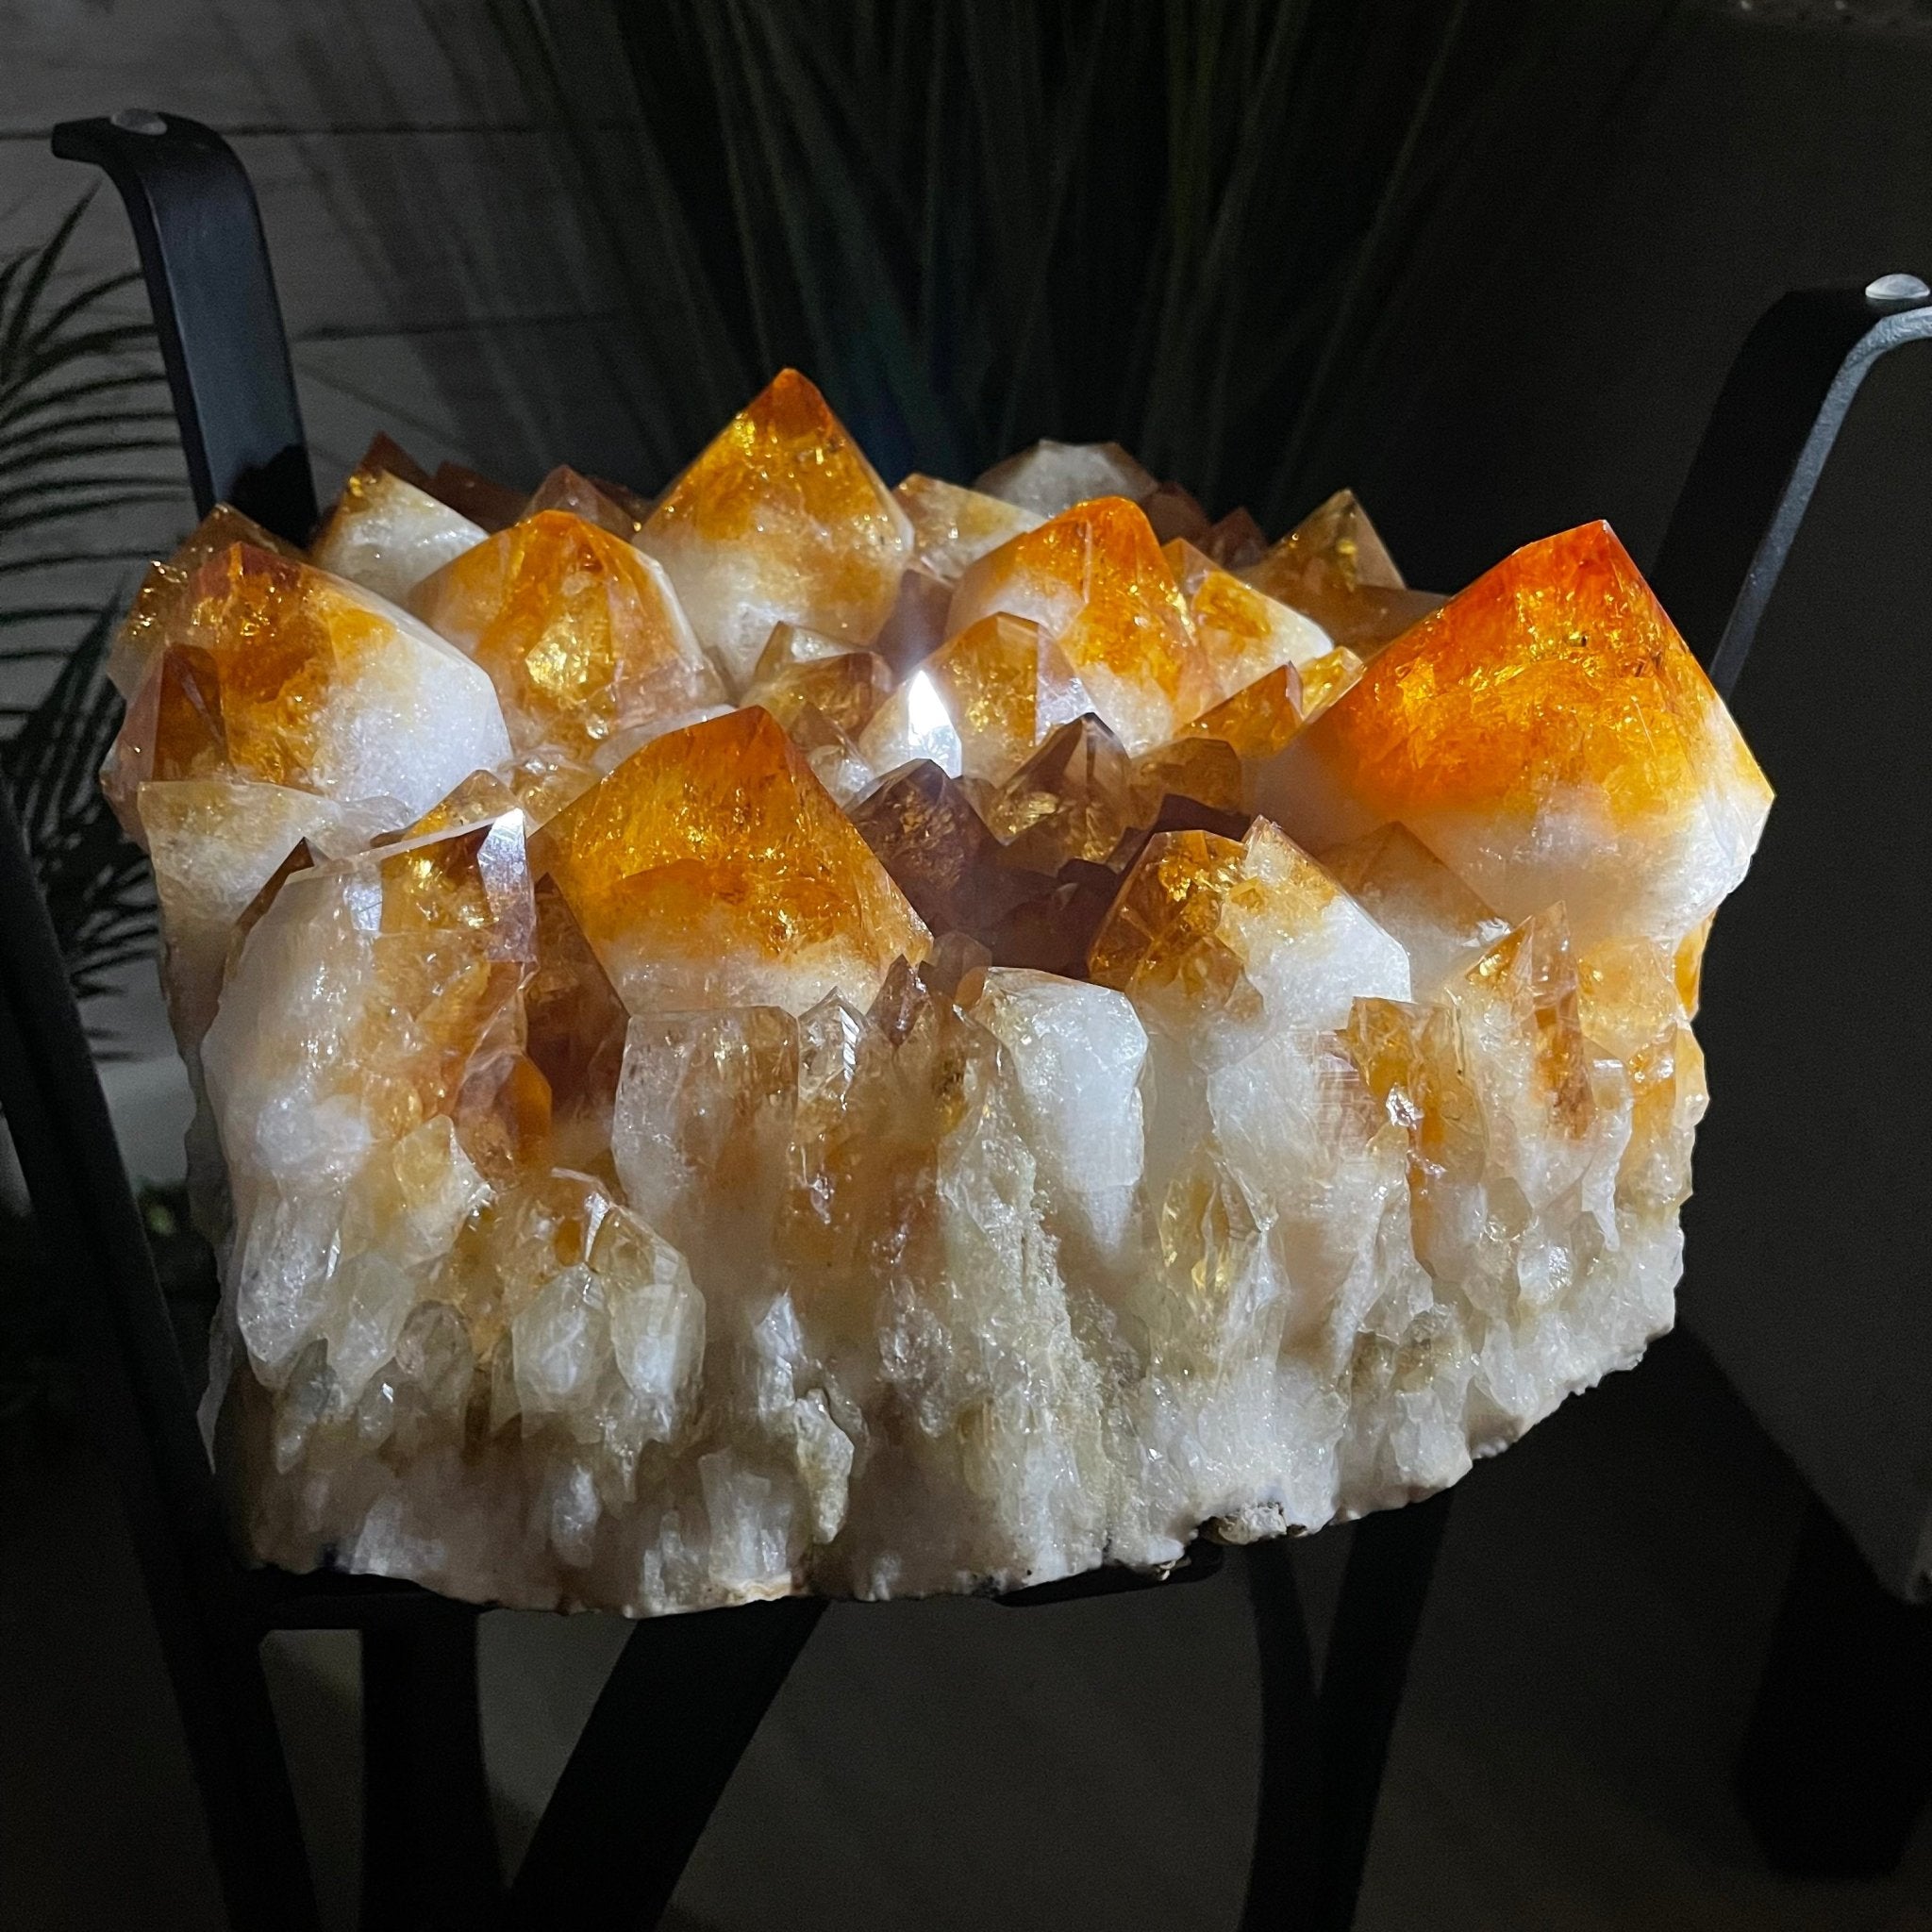 Extra Plus Quality Brazilian Citrine Geode Side Table, 46.1 lbs, 24" tall on a metal base #1392-0008 by Brazil Gems - Brazil GemsBrazil GemsExtra Plus Quality Brazilian Citrine Geode Side Table, 46.1 lbs, 24" tall on a metal base #1392-0008 by Brazil GemsTables: Side1392-0008